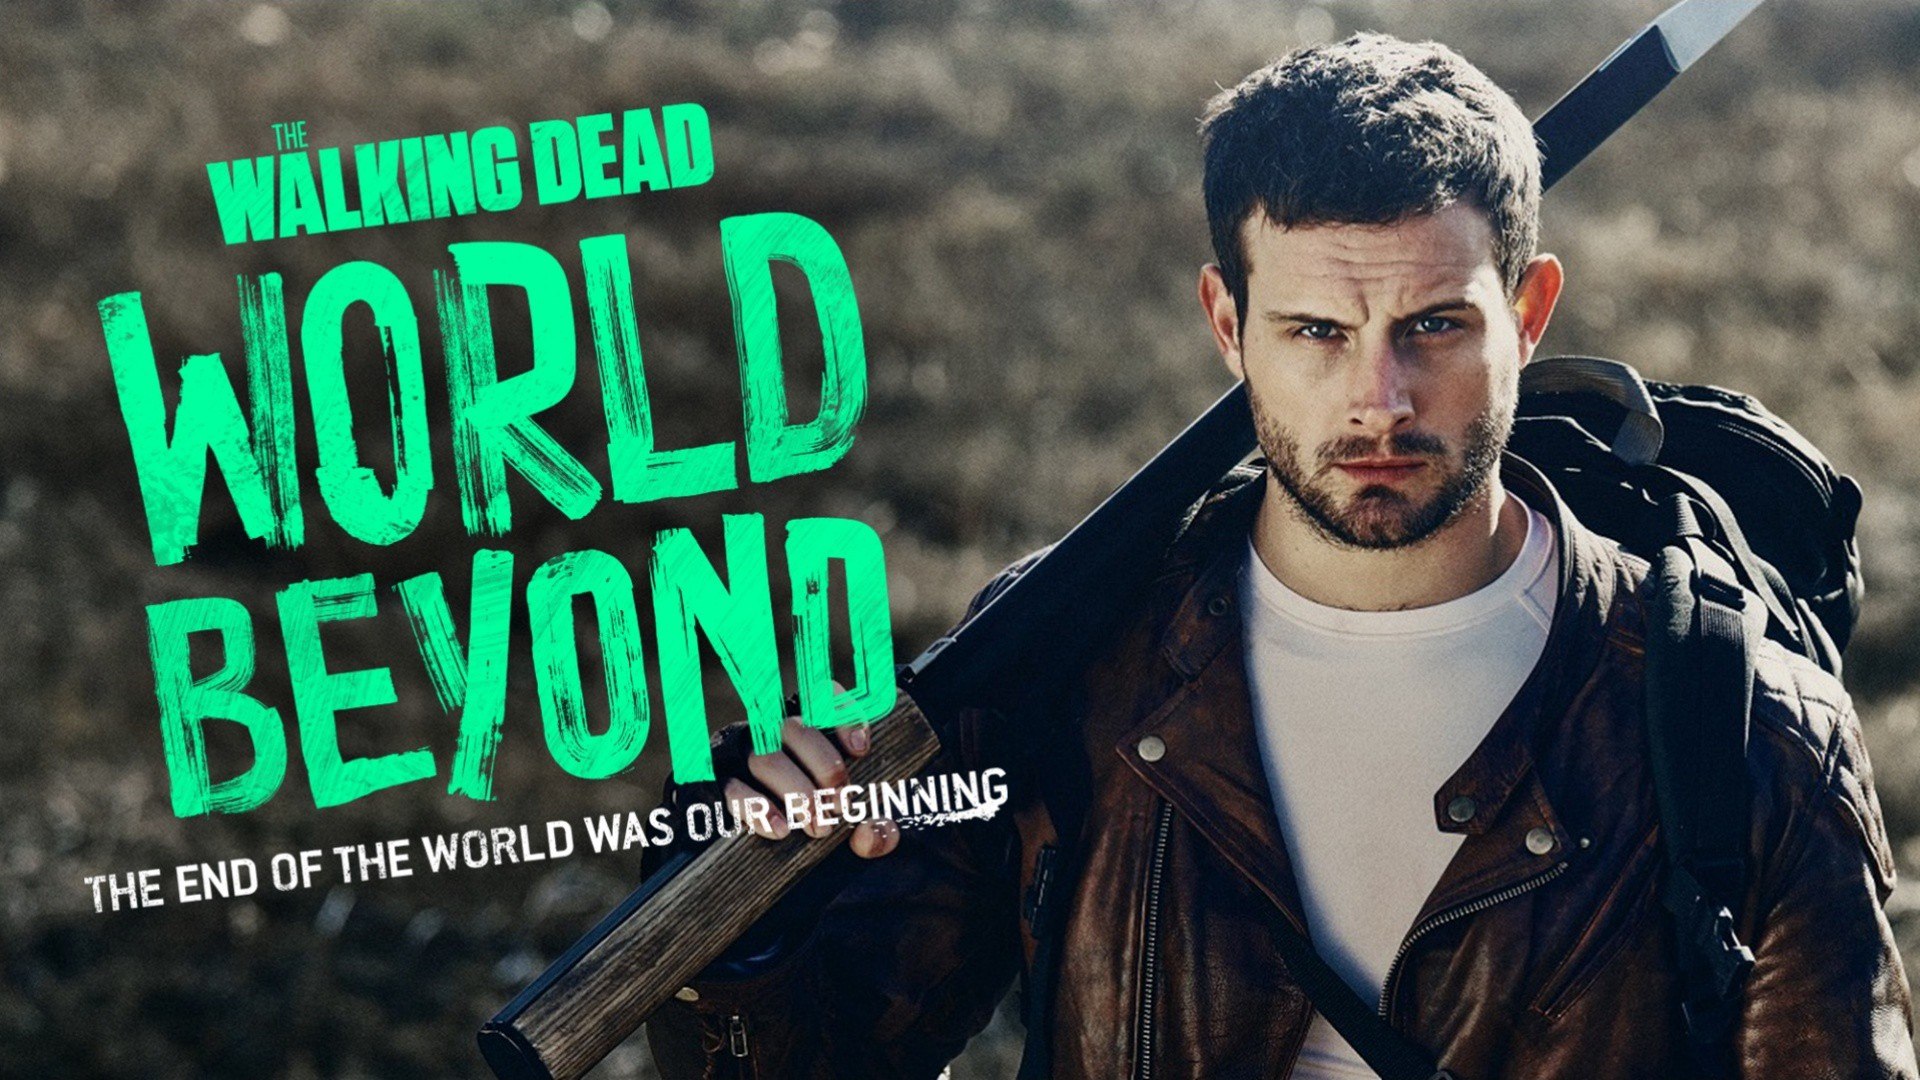 The Walking Dead: World Beyond Season 1 Episode 10 “In This Life” Recap Review